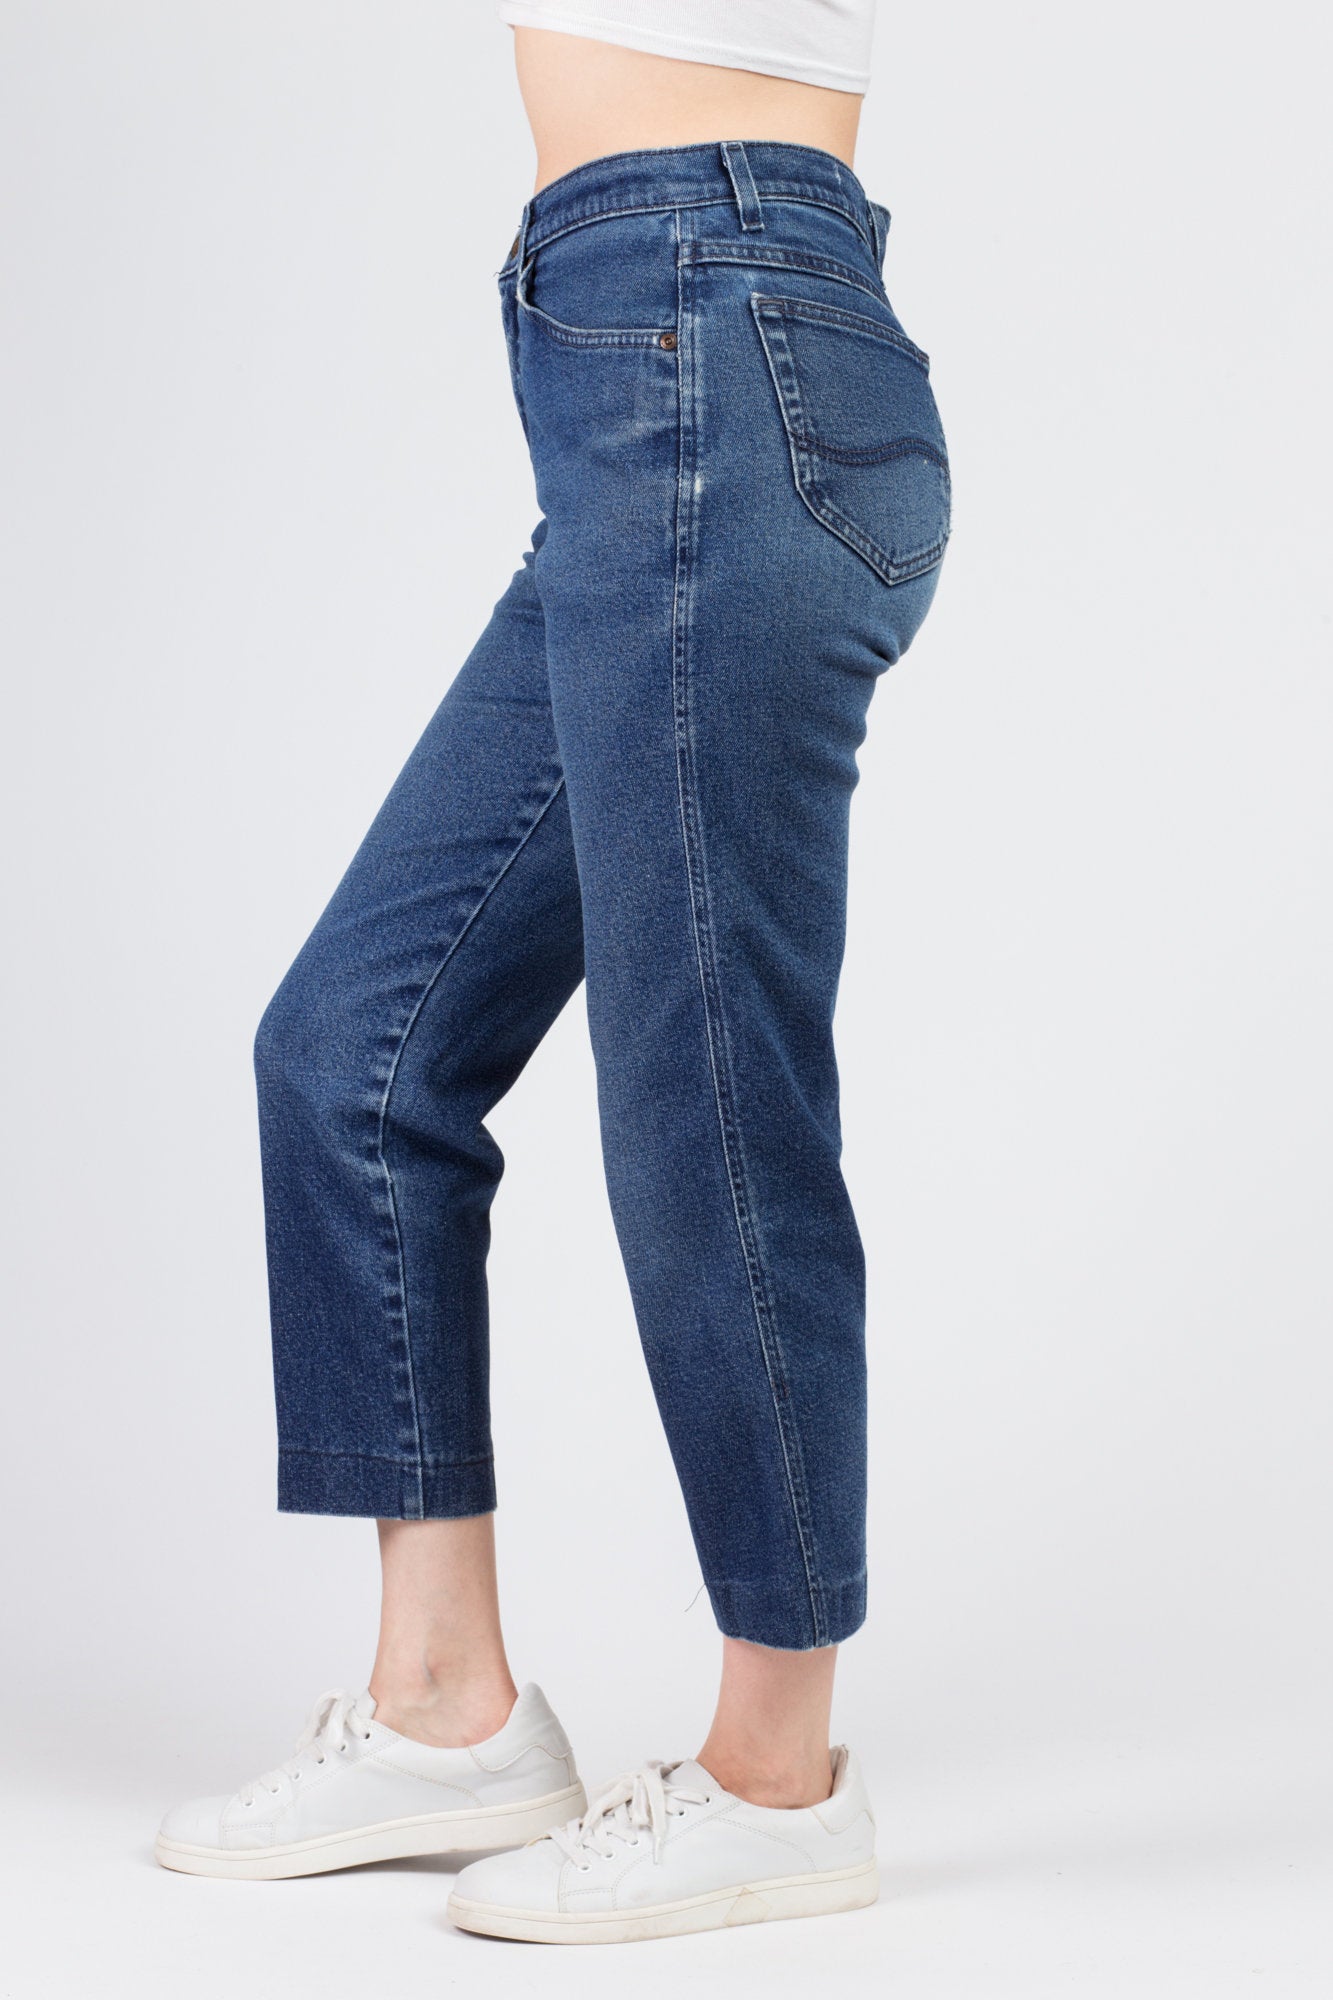 Vintage High Waisted Lee Jeans - Small to Medium